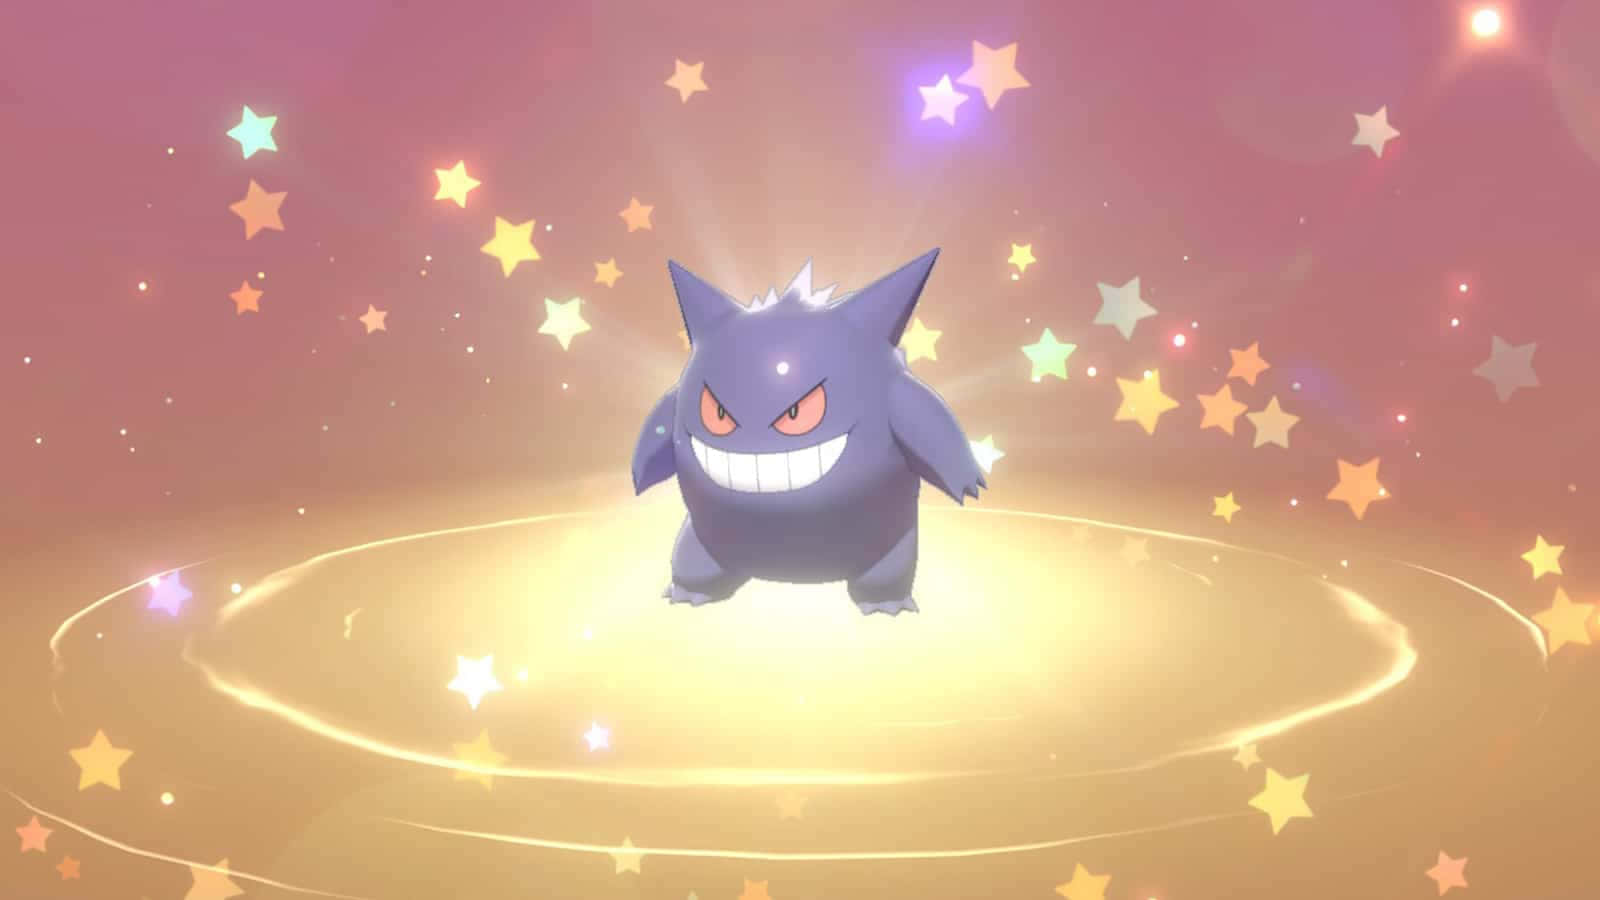 A Spooky Adventure Awaits with Gengar